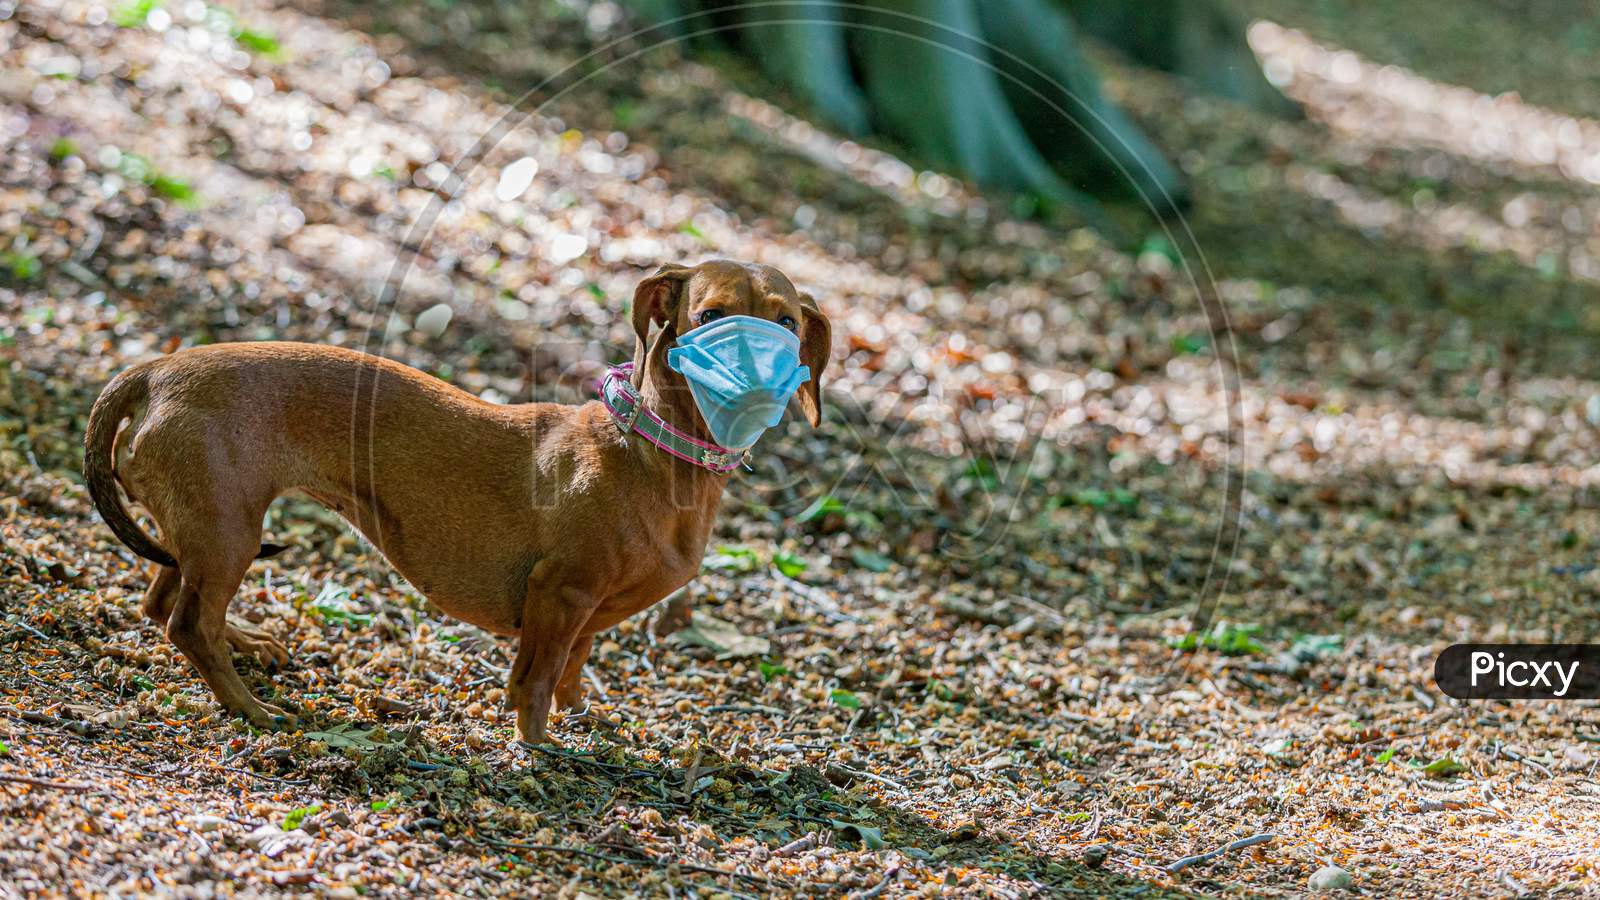 Brown Dachshund Wearing A Medical Mask Looking At The Camera In The Forest With A Blurred Background, Preventing The Spread Of Covid-19 Amid The Coronavirus Outbreak, Fun And Conceptual Image